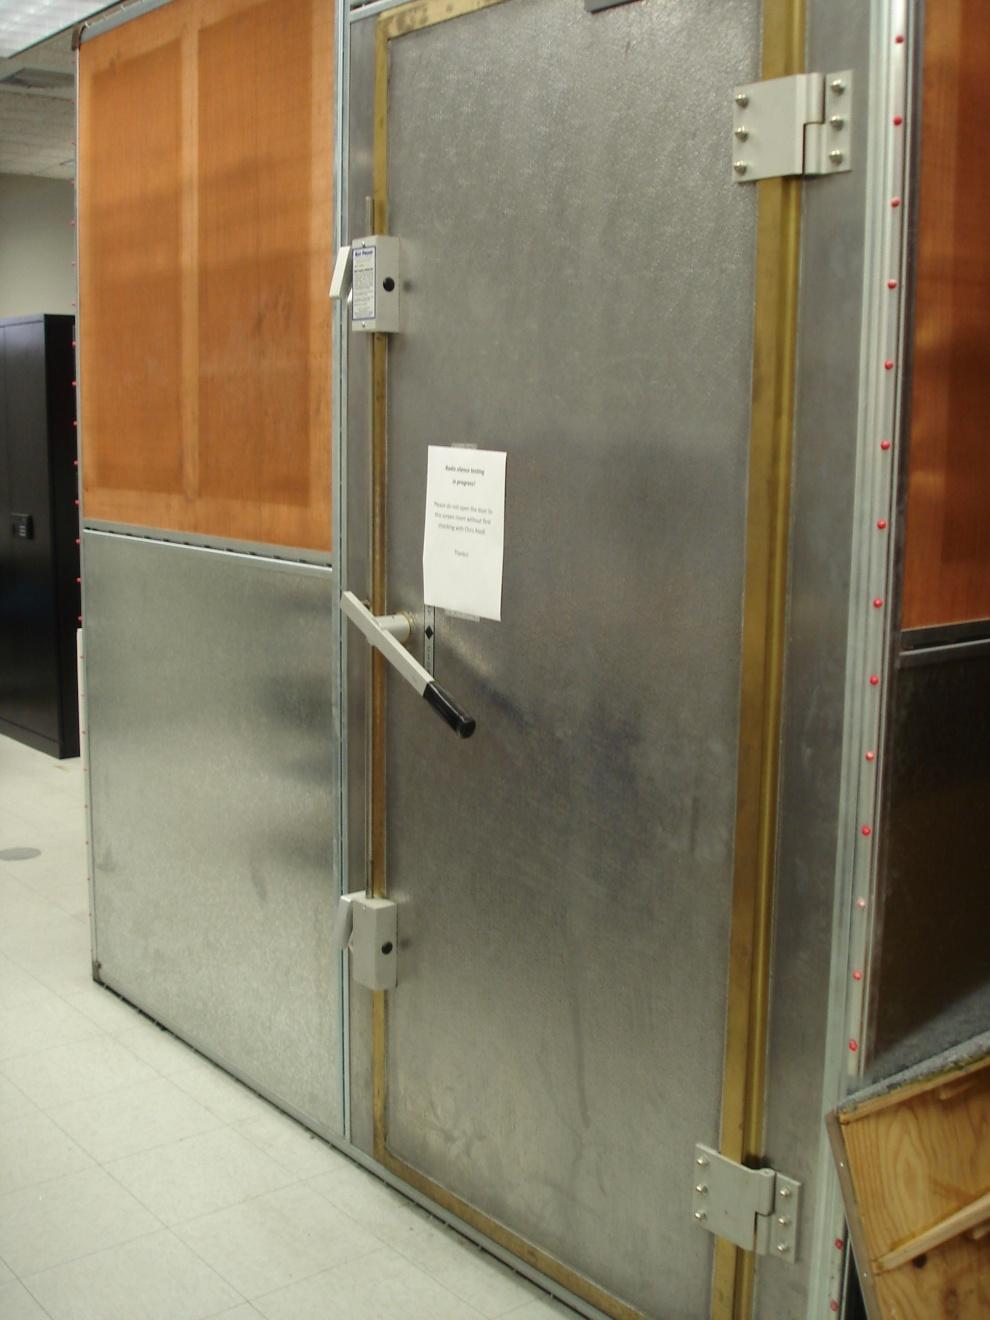 A screen room (Faraday cage) was also necessary to ensure complete isolation of the devices from the ambient environment.